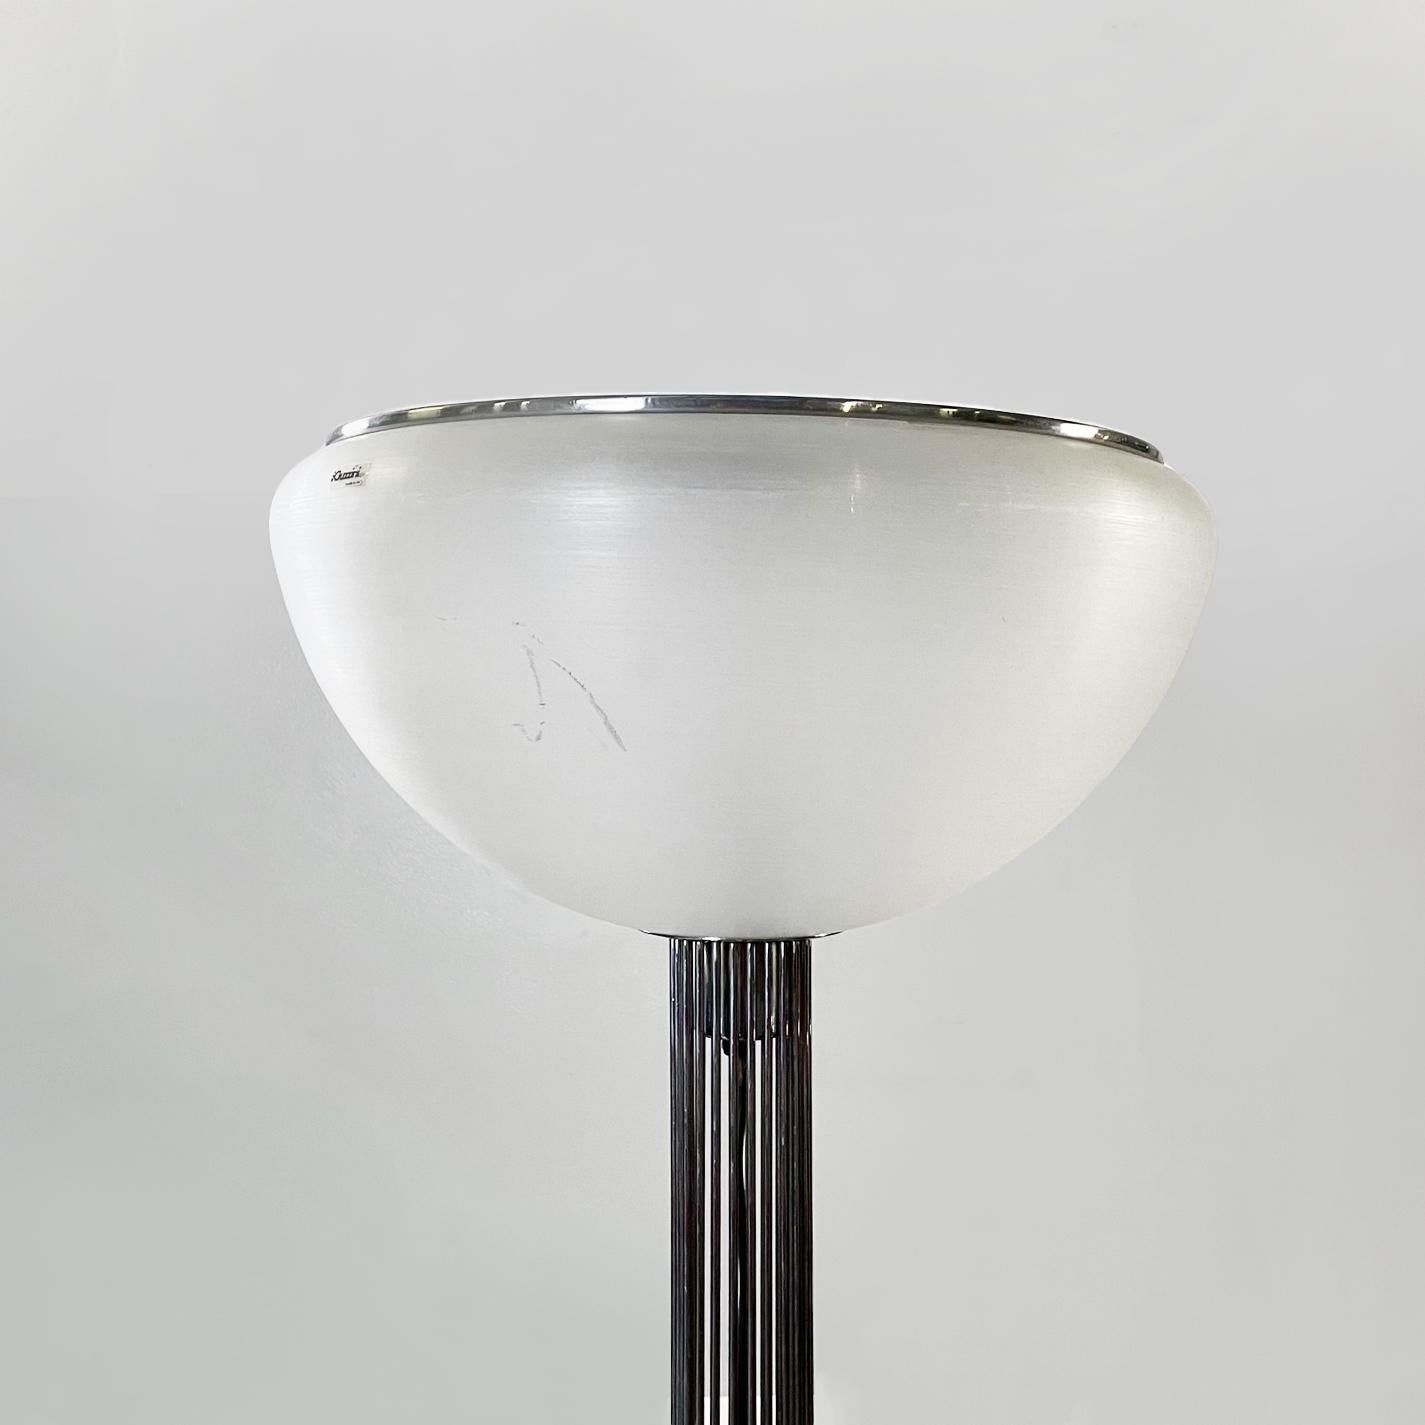 Italian mid-century chromed steel Moana floor lamp by Massoni for iGuzzini, 1960s.
Moana floor lamp with round base and tubular structure in chromed steel and lampshade in matt white plastic.
Produced by iGuzzini in 1960s and designed by Luigi